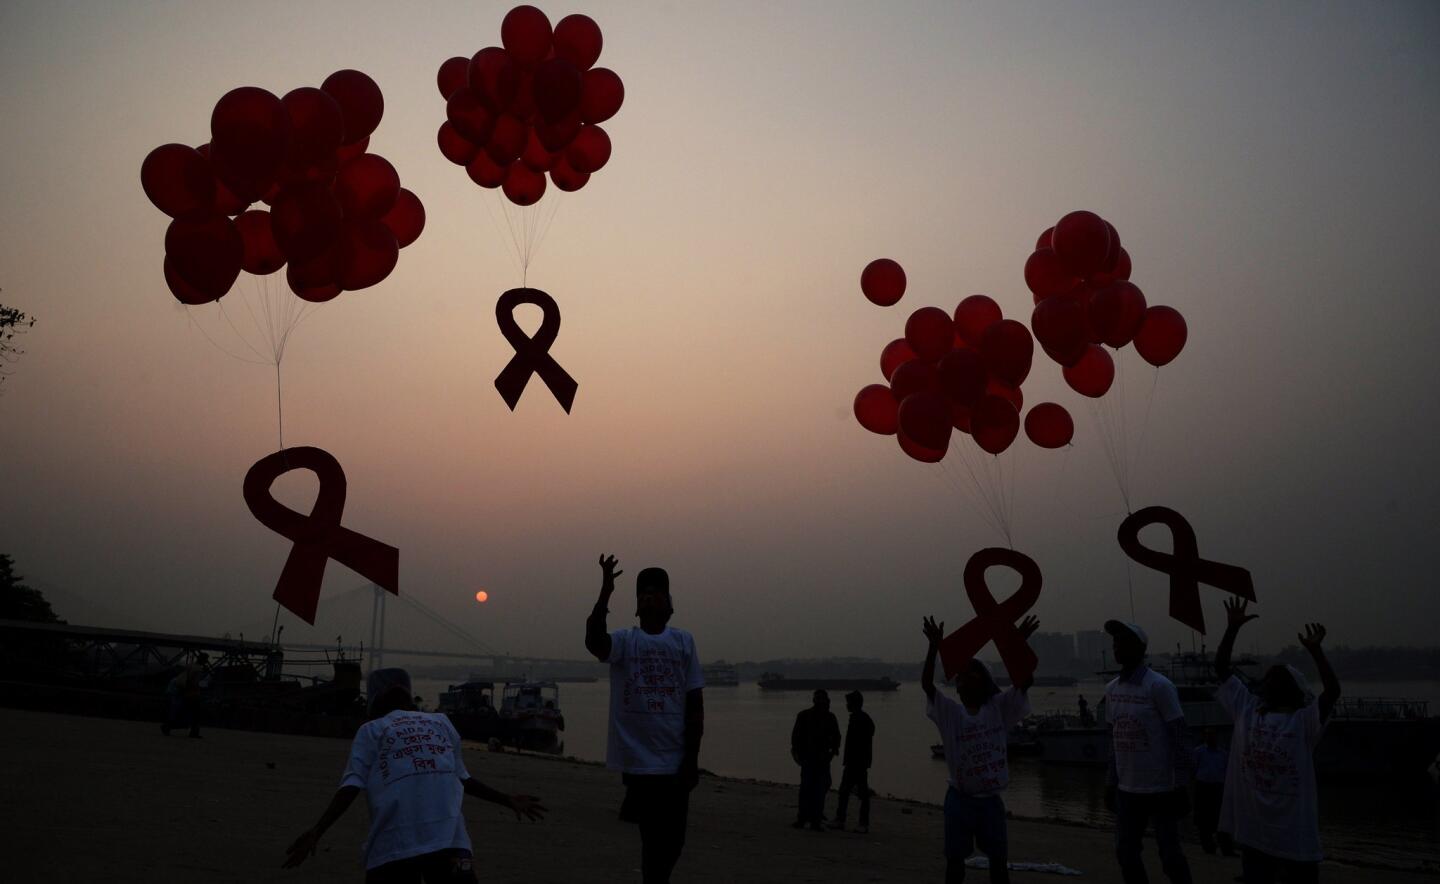 Indian social activists and children release ribbons and balloons during an event to mark World AIDS Day in Kolkata on December 1, 2014. According to the UN AIDS programme, India had the third-largest number of people living with HIV in the world at the end of 2013 and it accounts for more than half of all AIDS-related deaths in the Asia-Pacific region. In 2012, 140,000 people died in India because of AIDS. The Indian government has been providing free antiretroviral drugs for HIV treatment since 2004, but only 50 percent of those eligible for the treatment were getting it in 2012, according to a report by the World Health Organization.